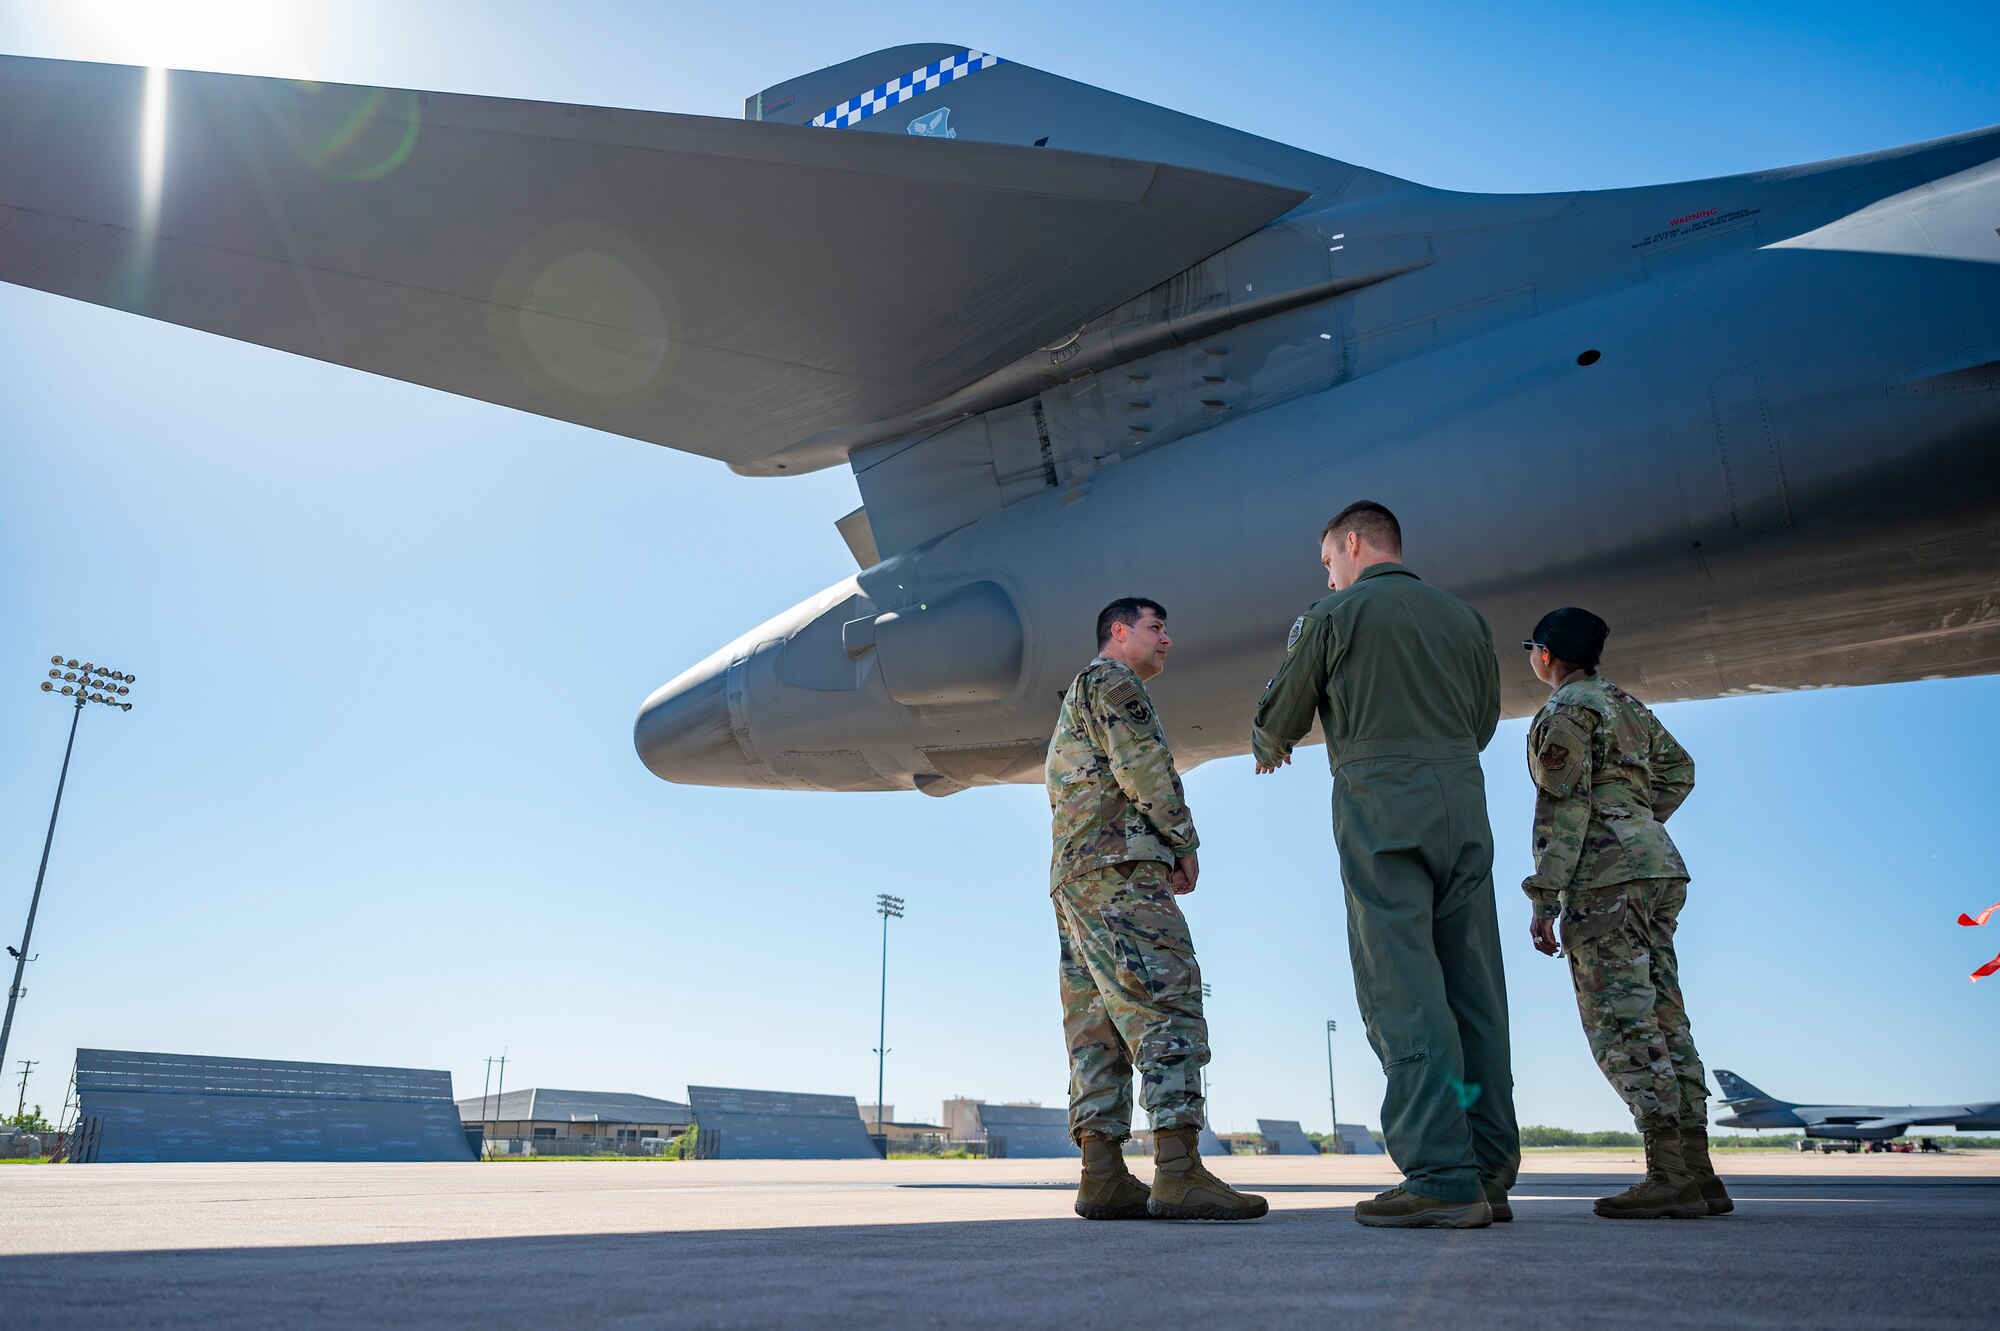 Lt. Col. Nathan Jenkins, 9th Bomb Squadron commander, center, briefs Maj. Gen. Andrew Gebara, 8th Air Force and Joint-Global Strike Operations Center commander, left, and Chief Master Sgt. Melvina Smith, 8th Air Force command chief and J-GSOC senior enlisted leader, while observing a B-1B Lancer on the flightline at Dyess Air Force Base, Texas, Aug. 23, 2021. During his visit, Gebara received several briefings on the B-1’s mission set and combat capabilities. (U.S. Air Force photo by Senior Airman Colin Hollowell)